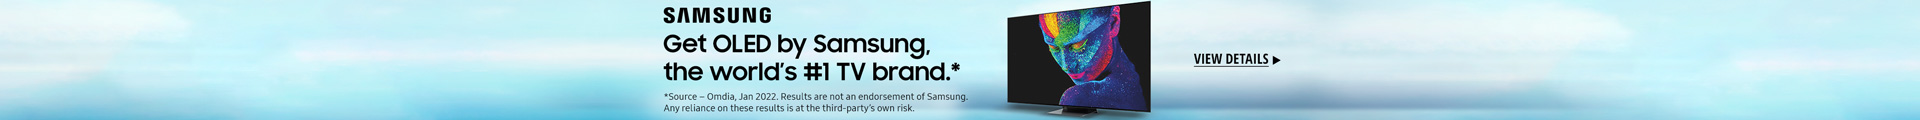 Get OLED by Samsung, the world’s #1 TV brand